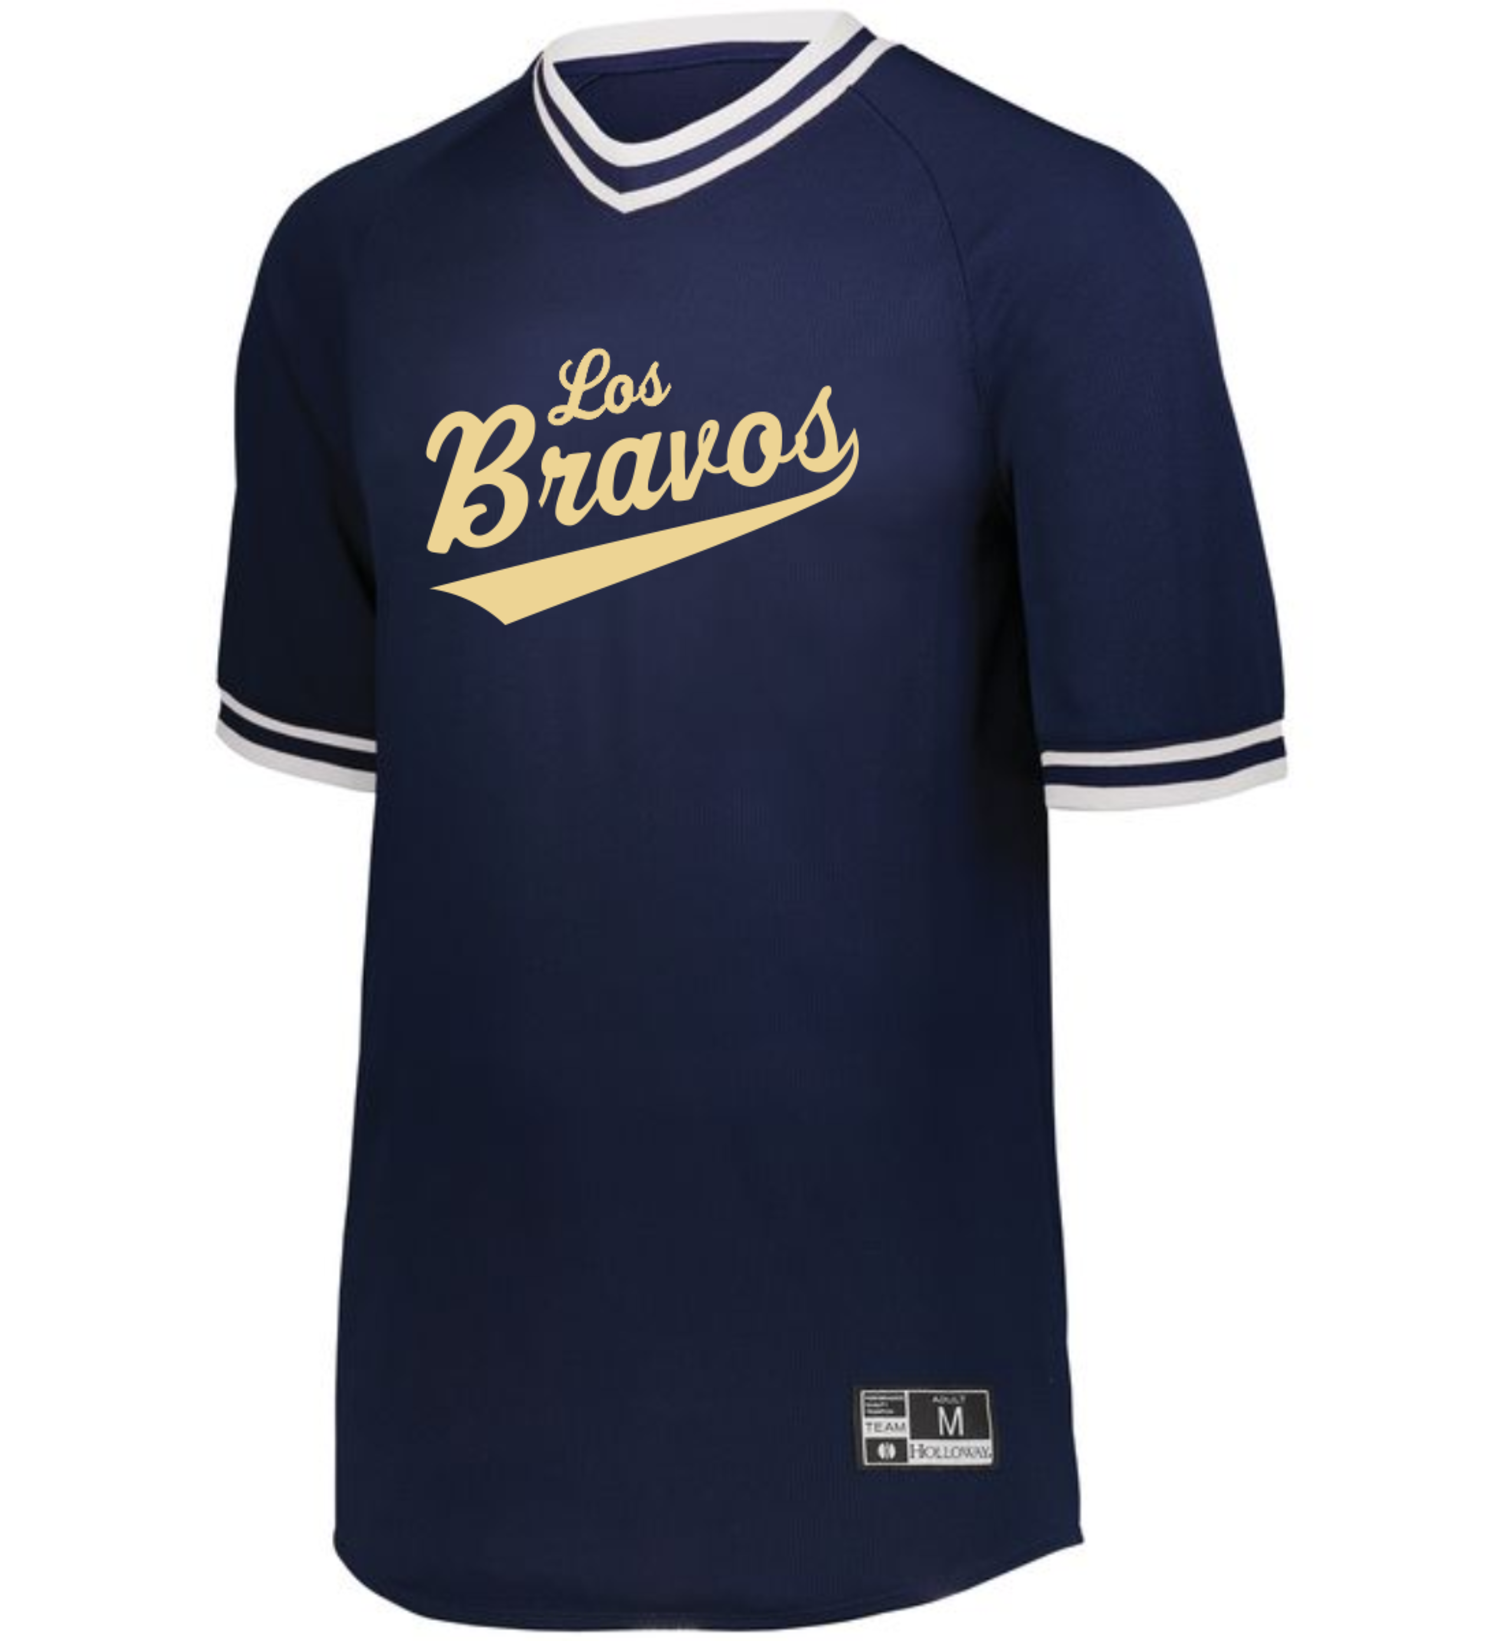 MLB on FOX - The Los Bravos jerseys are out tonight in ATL